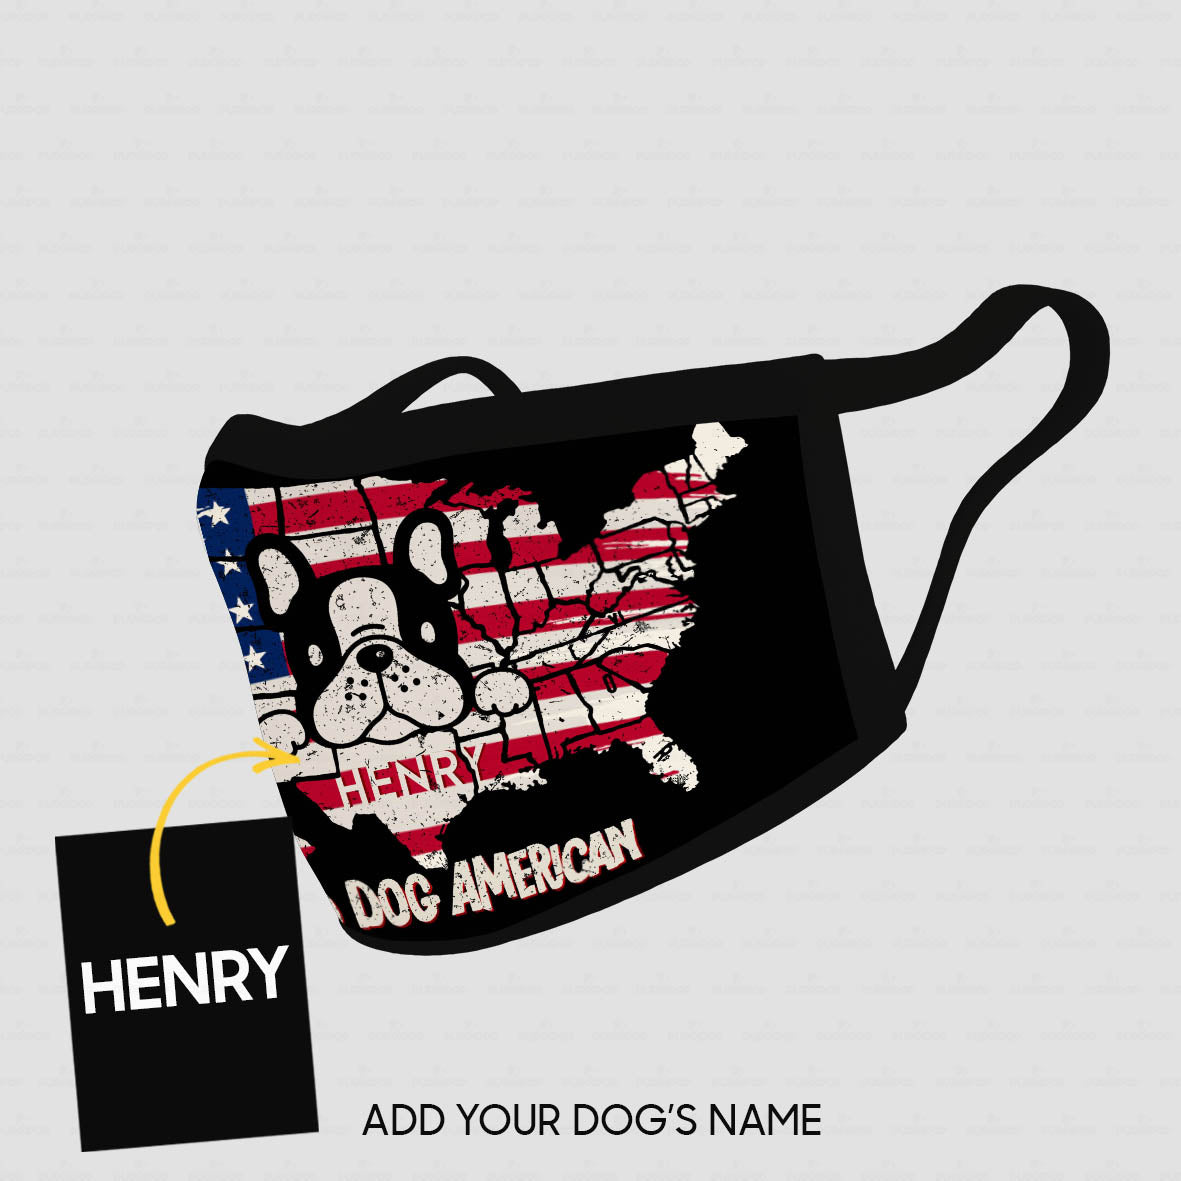 Personalized Dog Gift Idea - Dad Dog American For Dog Lovers - Cloth Mask